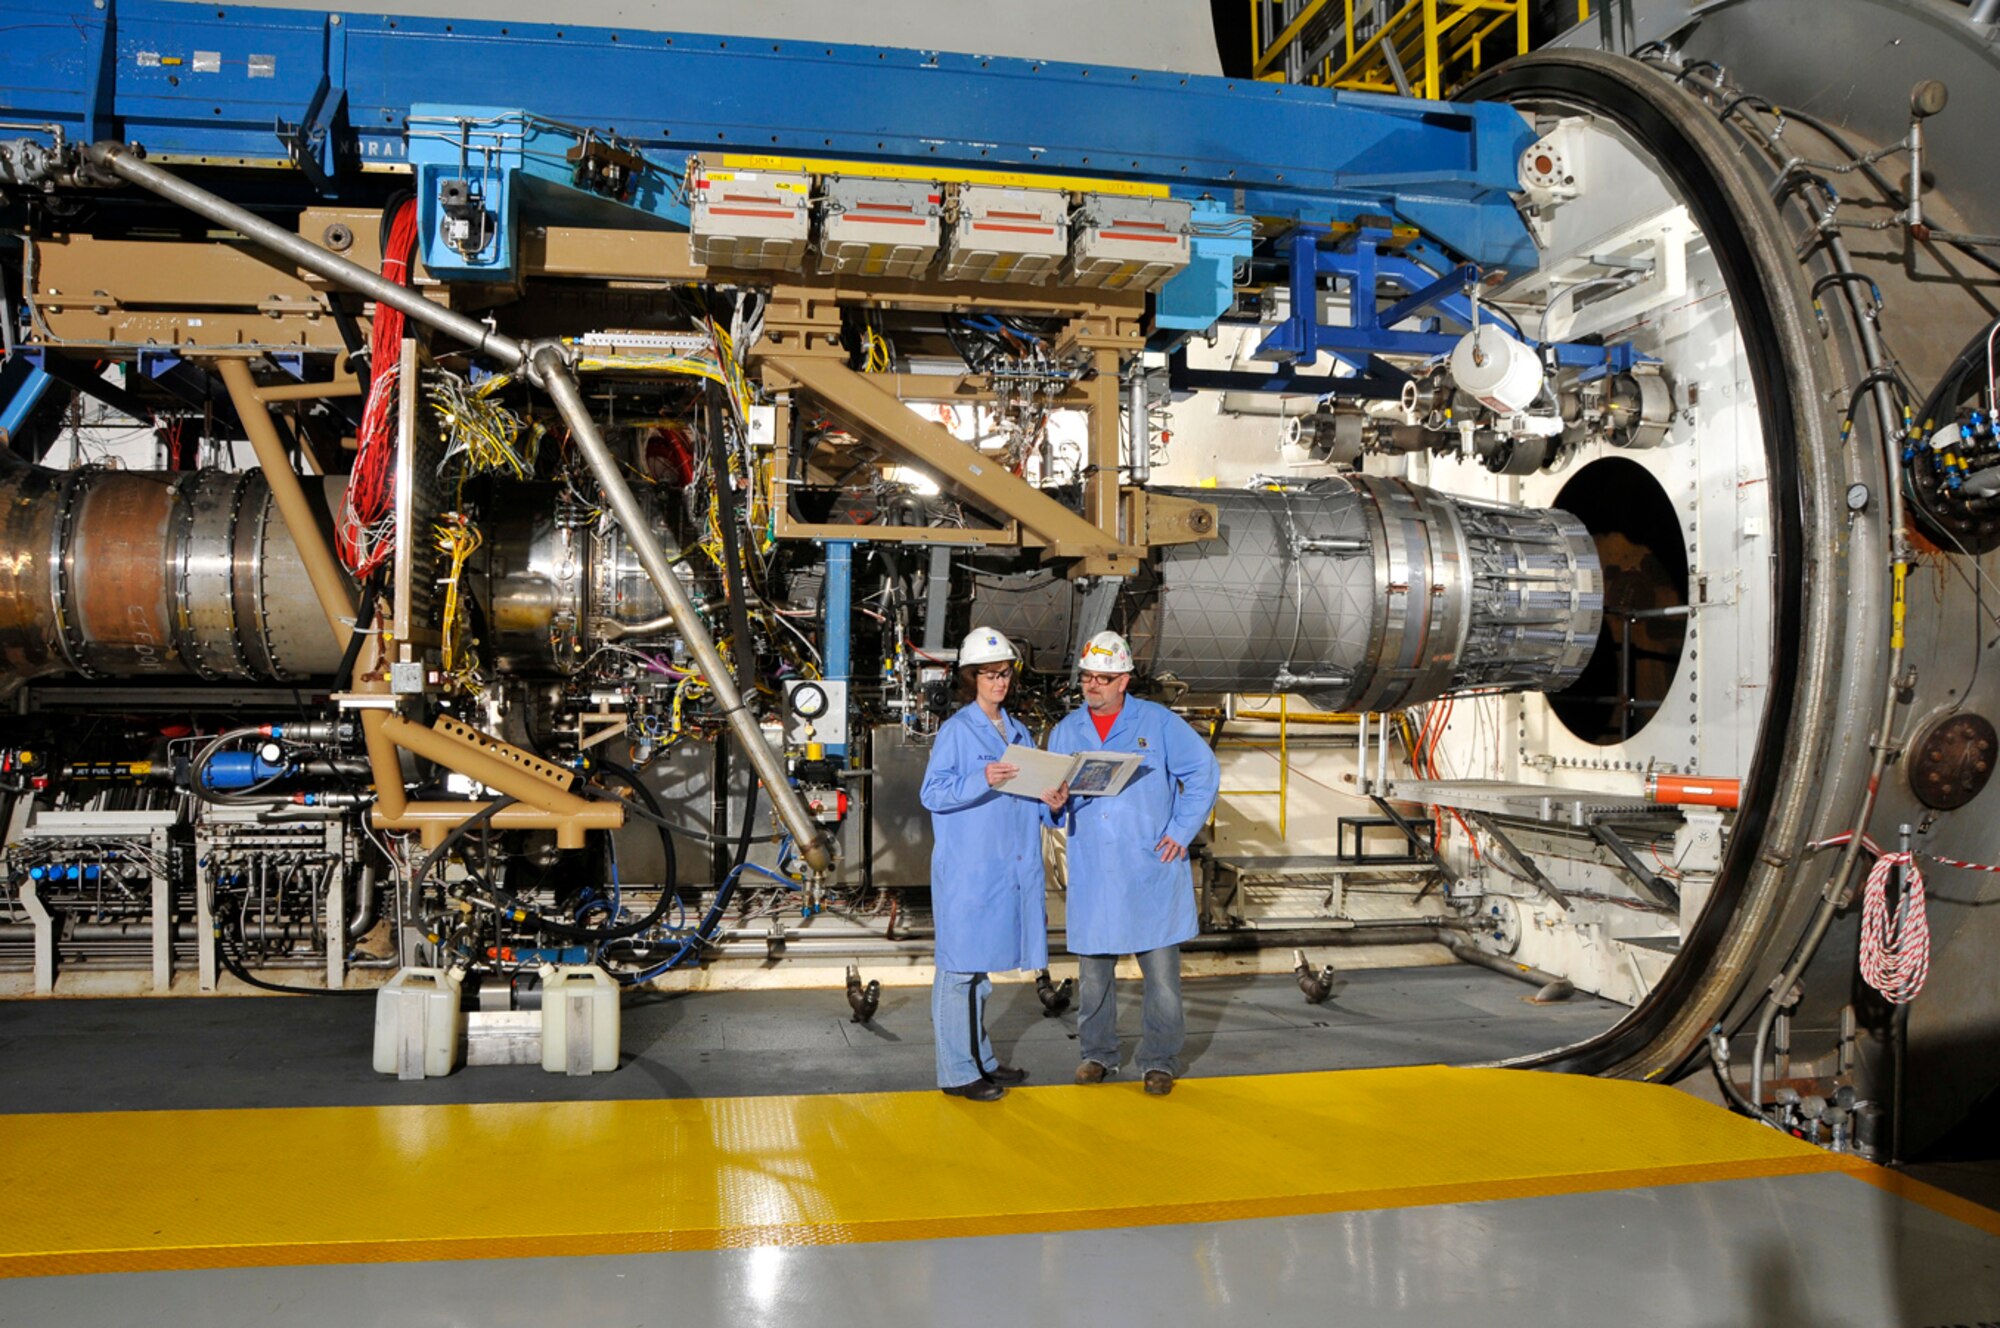 From left, Joan Clark, ATA instrument technician lead, and Paul Buckner, ATA working foreman, verify locations of instrumentation for troubleshooting discrepancies during a break in a test run of a F100 engine in AEDC’s J-1 test cell. (Photo by Rick Goodfriend)